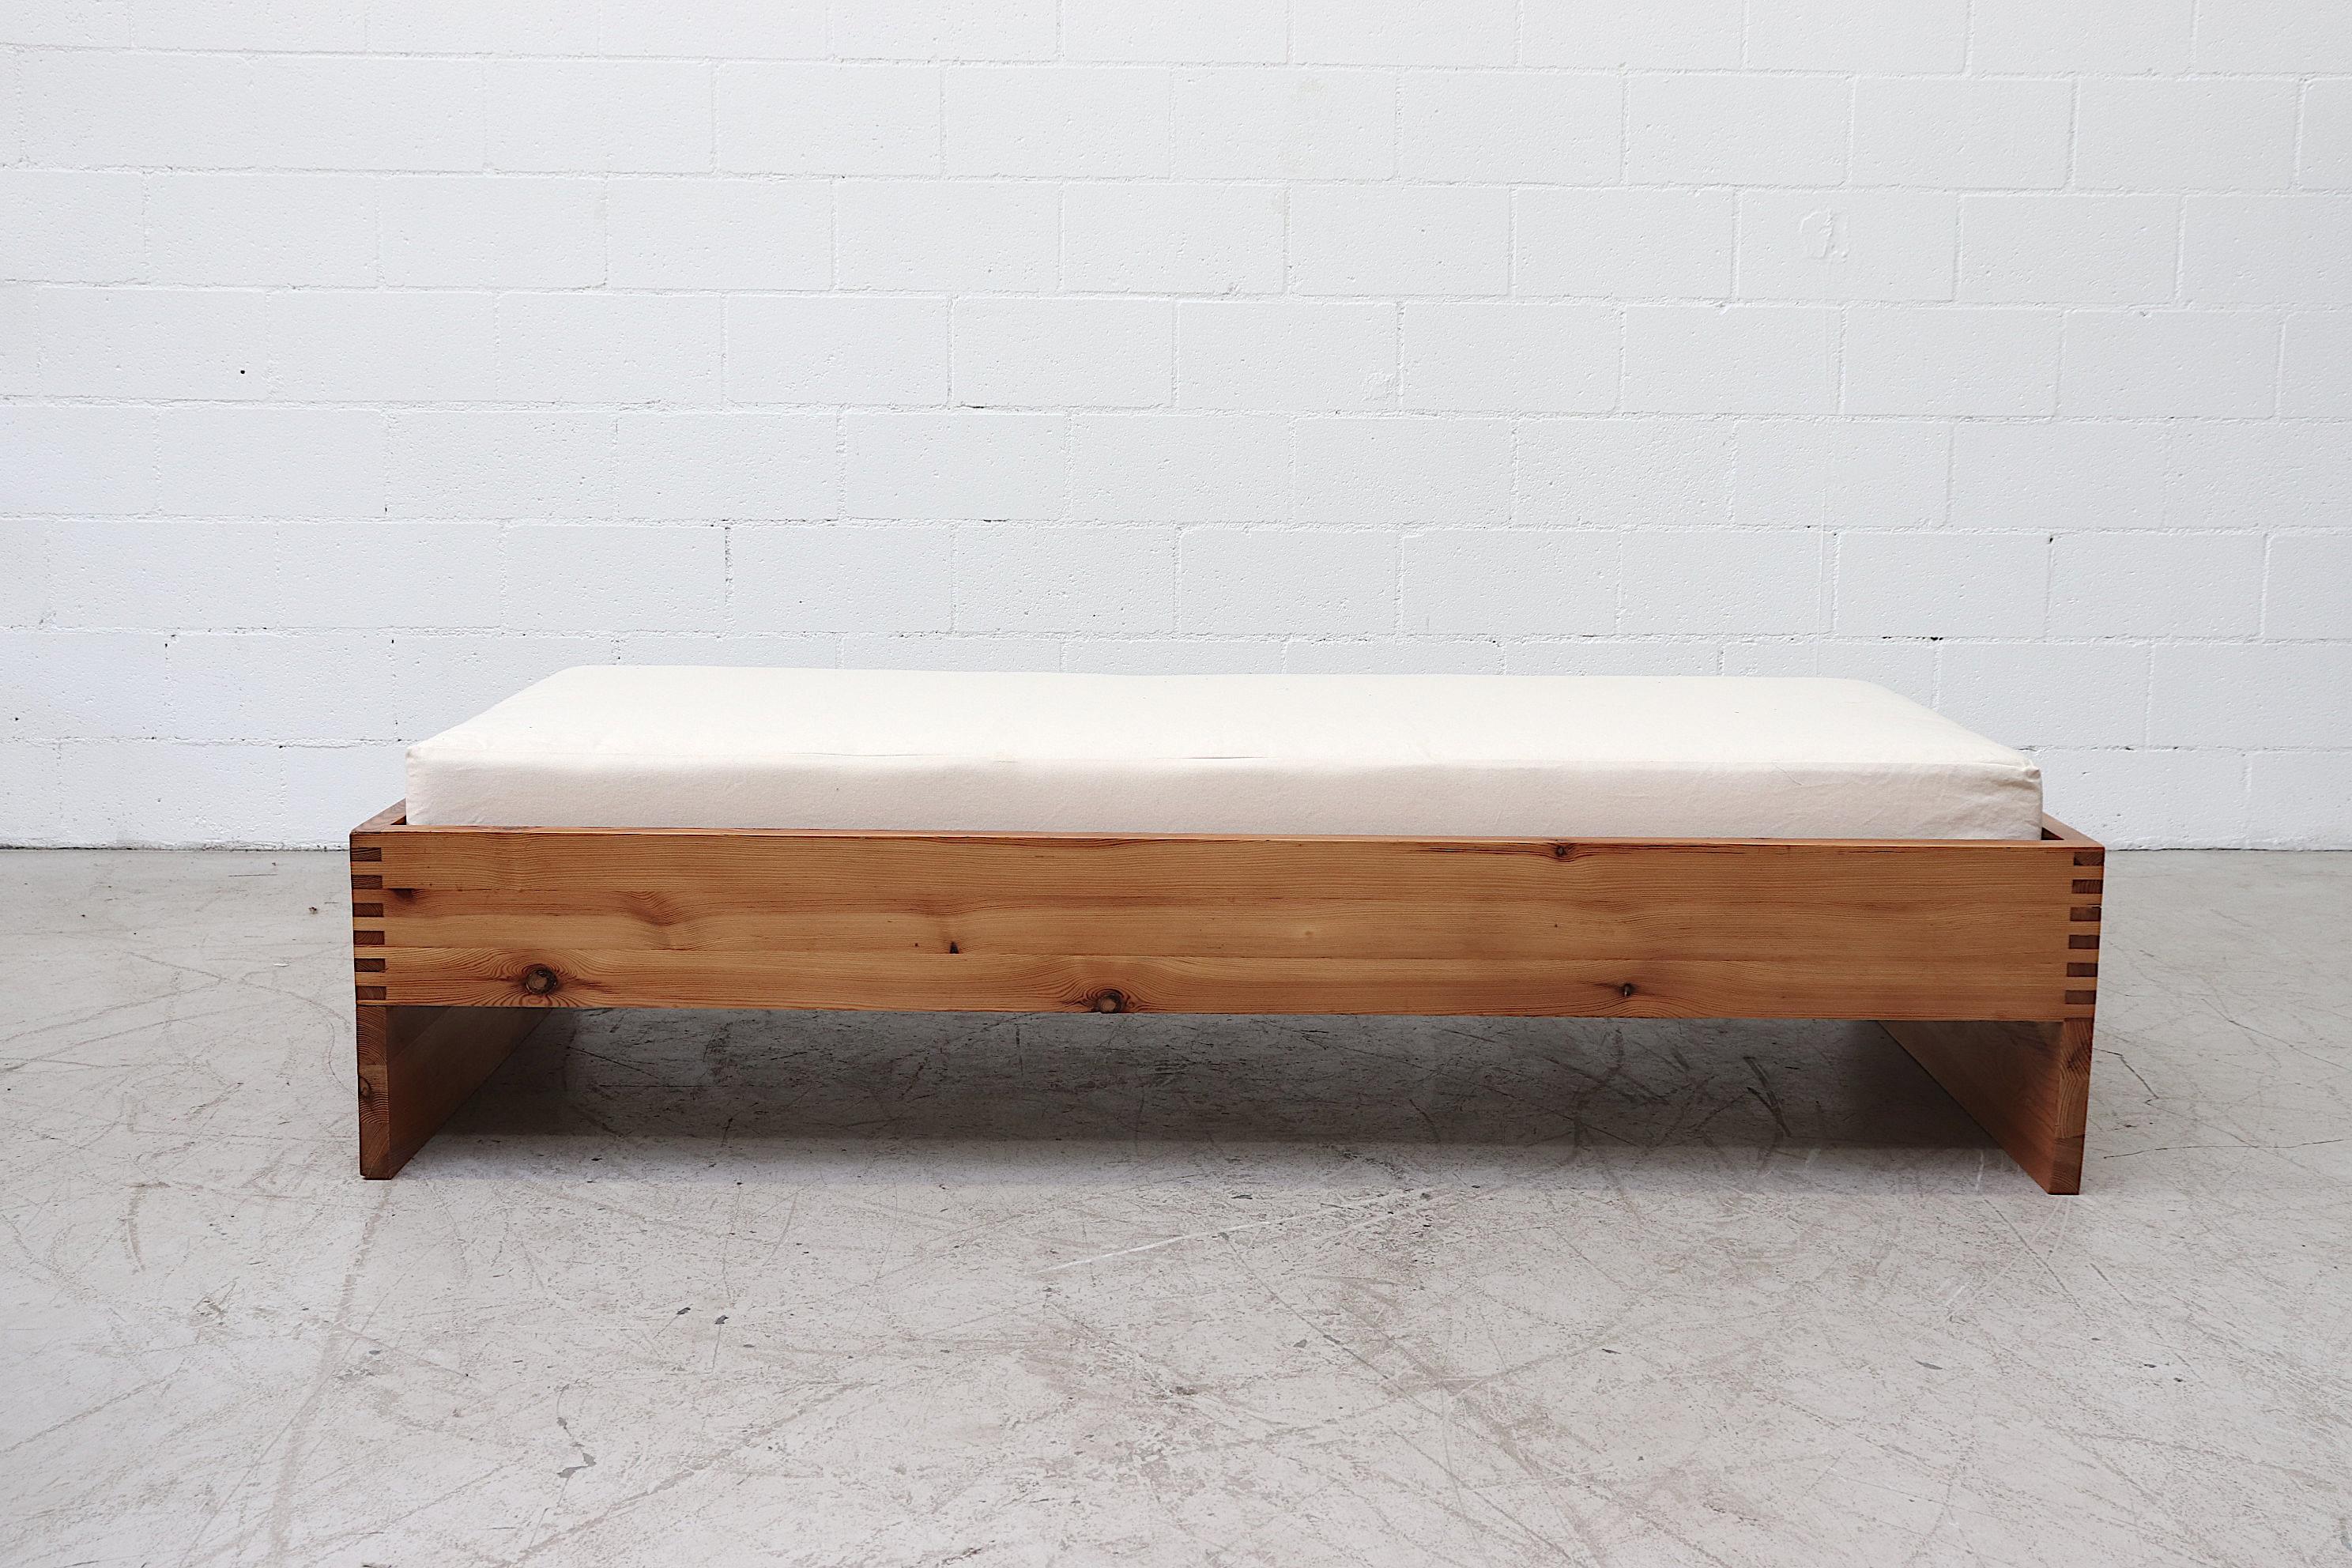 Lightly refinished natural pine platform daybed or bed by Ate Van Apeldoorn. Good original condition with light wear. The custom mattress measures 74 x 32 x 8, leaving room for bedding.